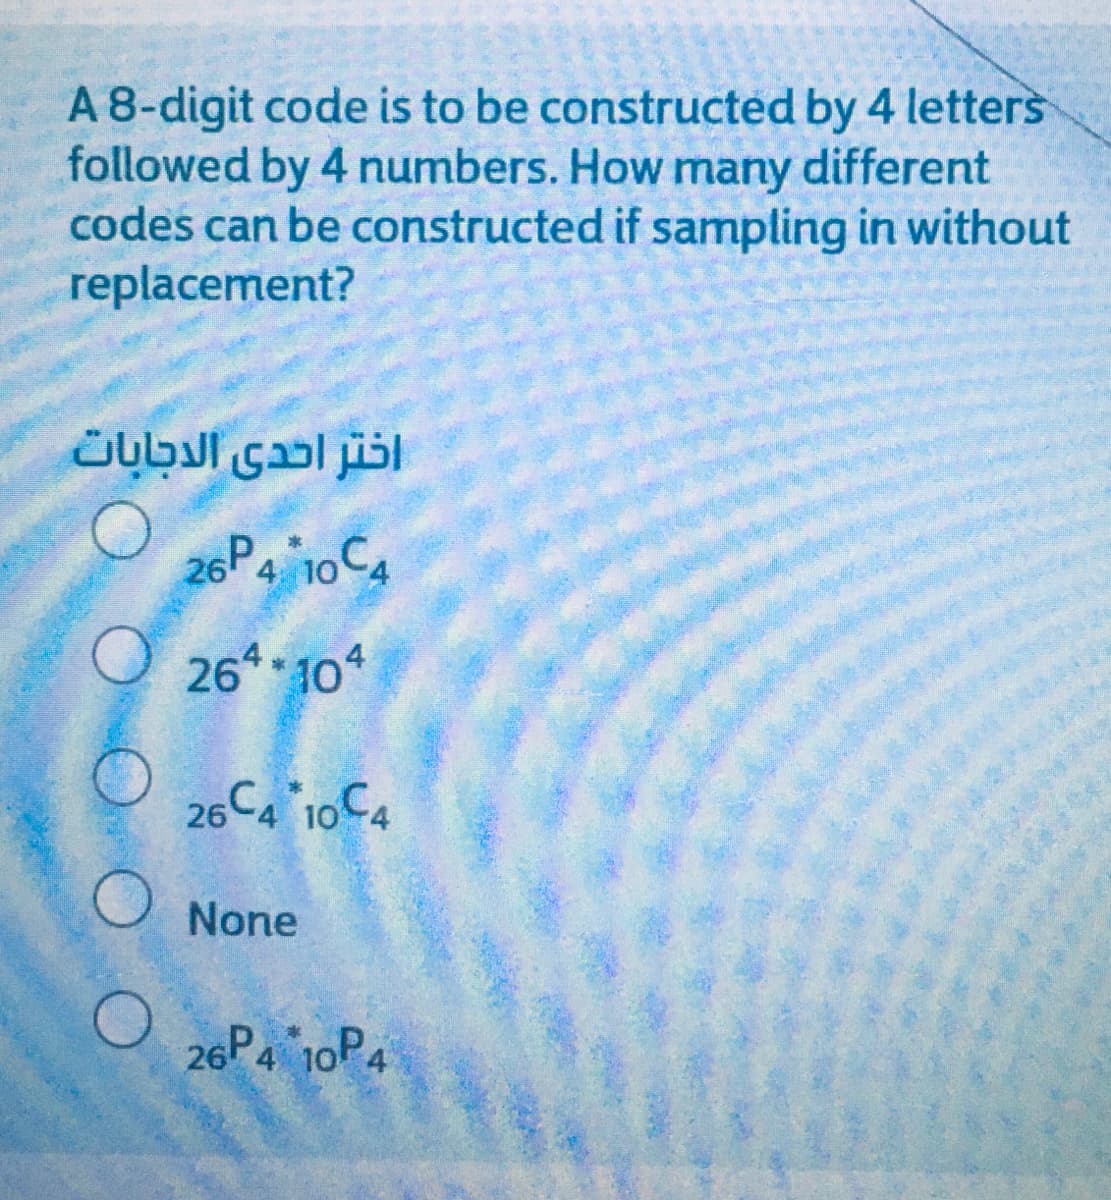 A 8-digit code is to be constructed by 4 letters
followed by 4 numbers. How many different
codes can be constructed if sampling in without
replacement?
اختر احدى الدجابات
26P4 10C4
O 26* 104
26
C4 10C4
None
26P4 10P4
